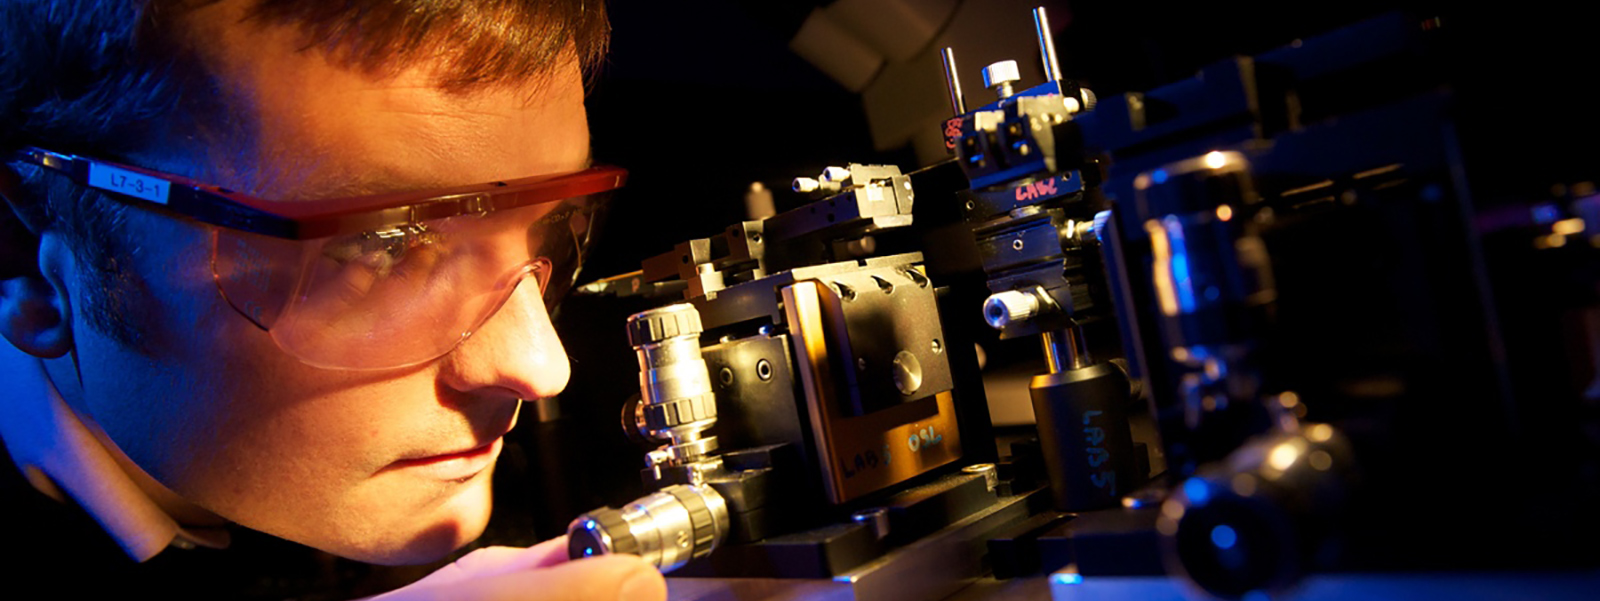 Student setting up a laser rig